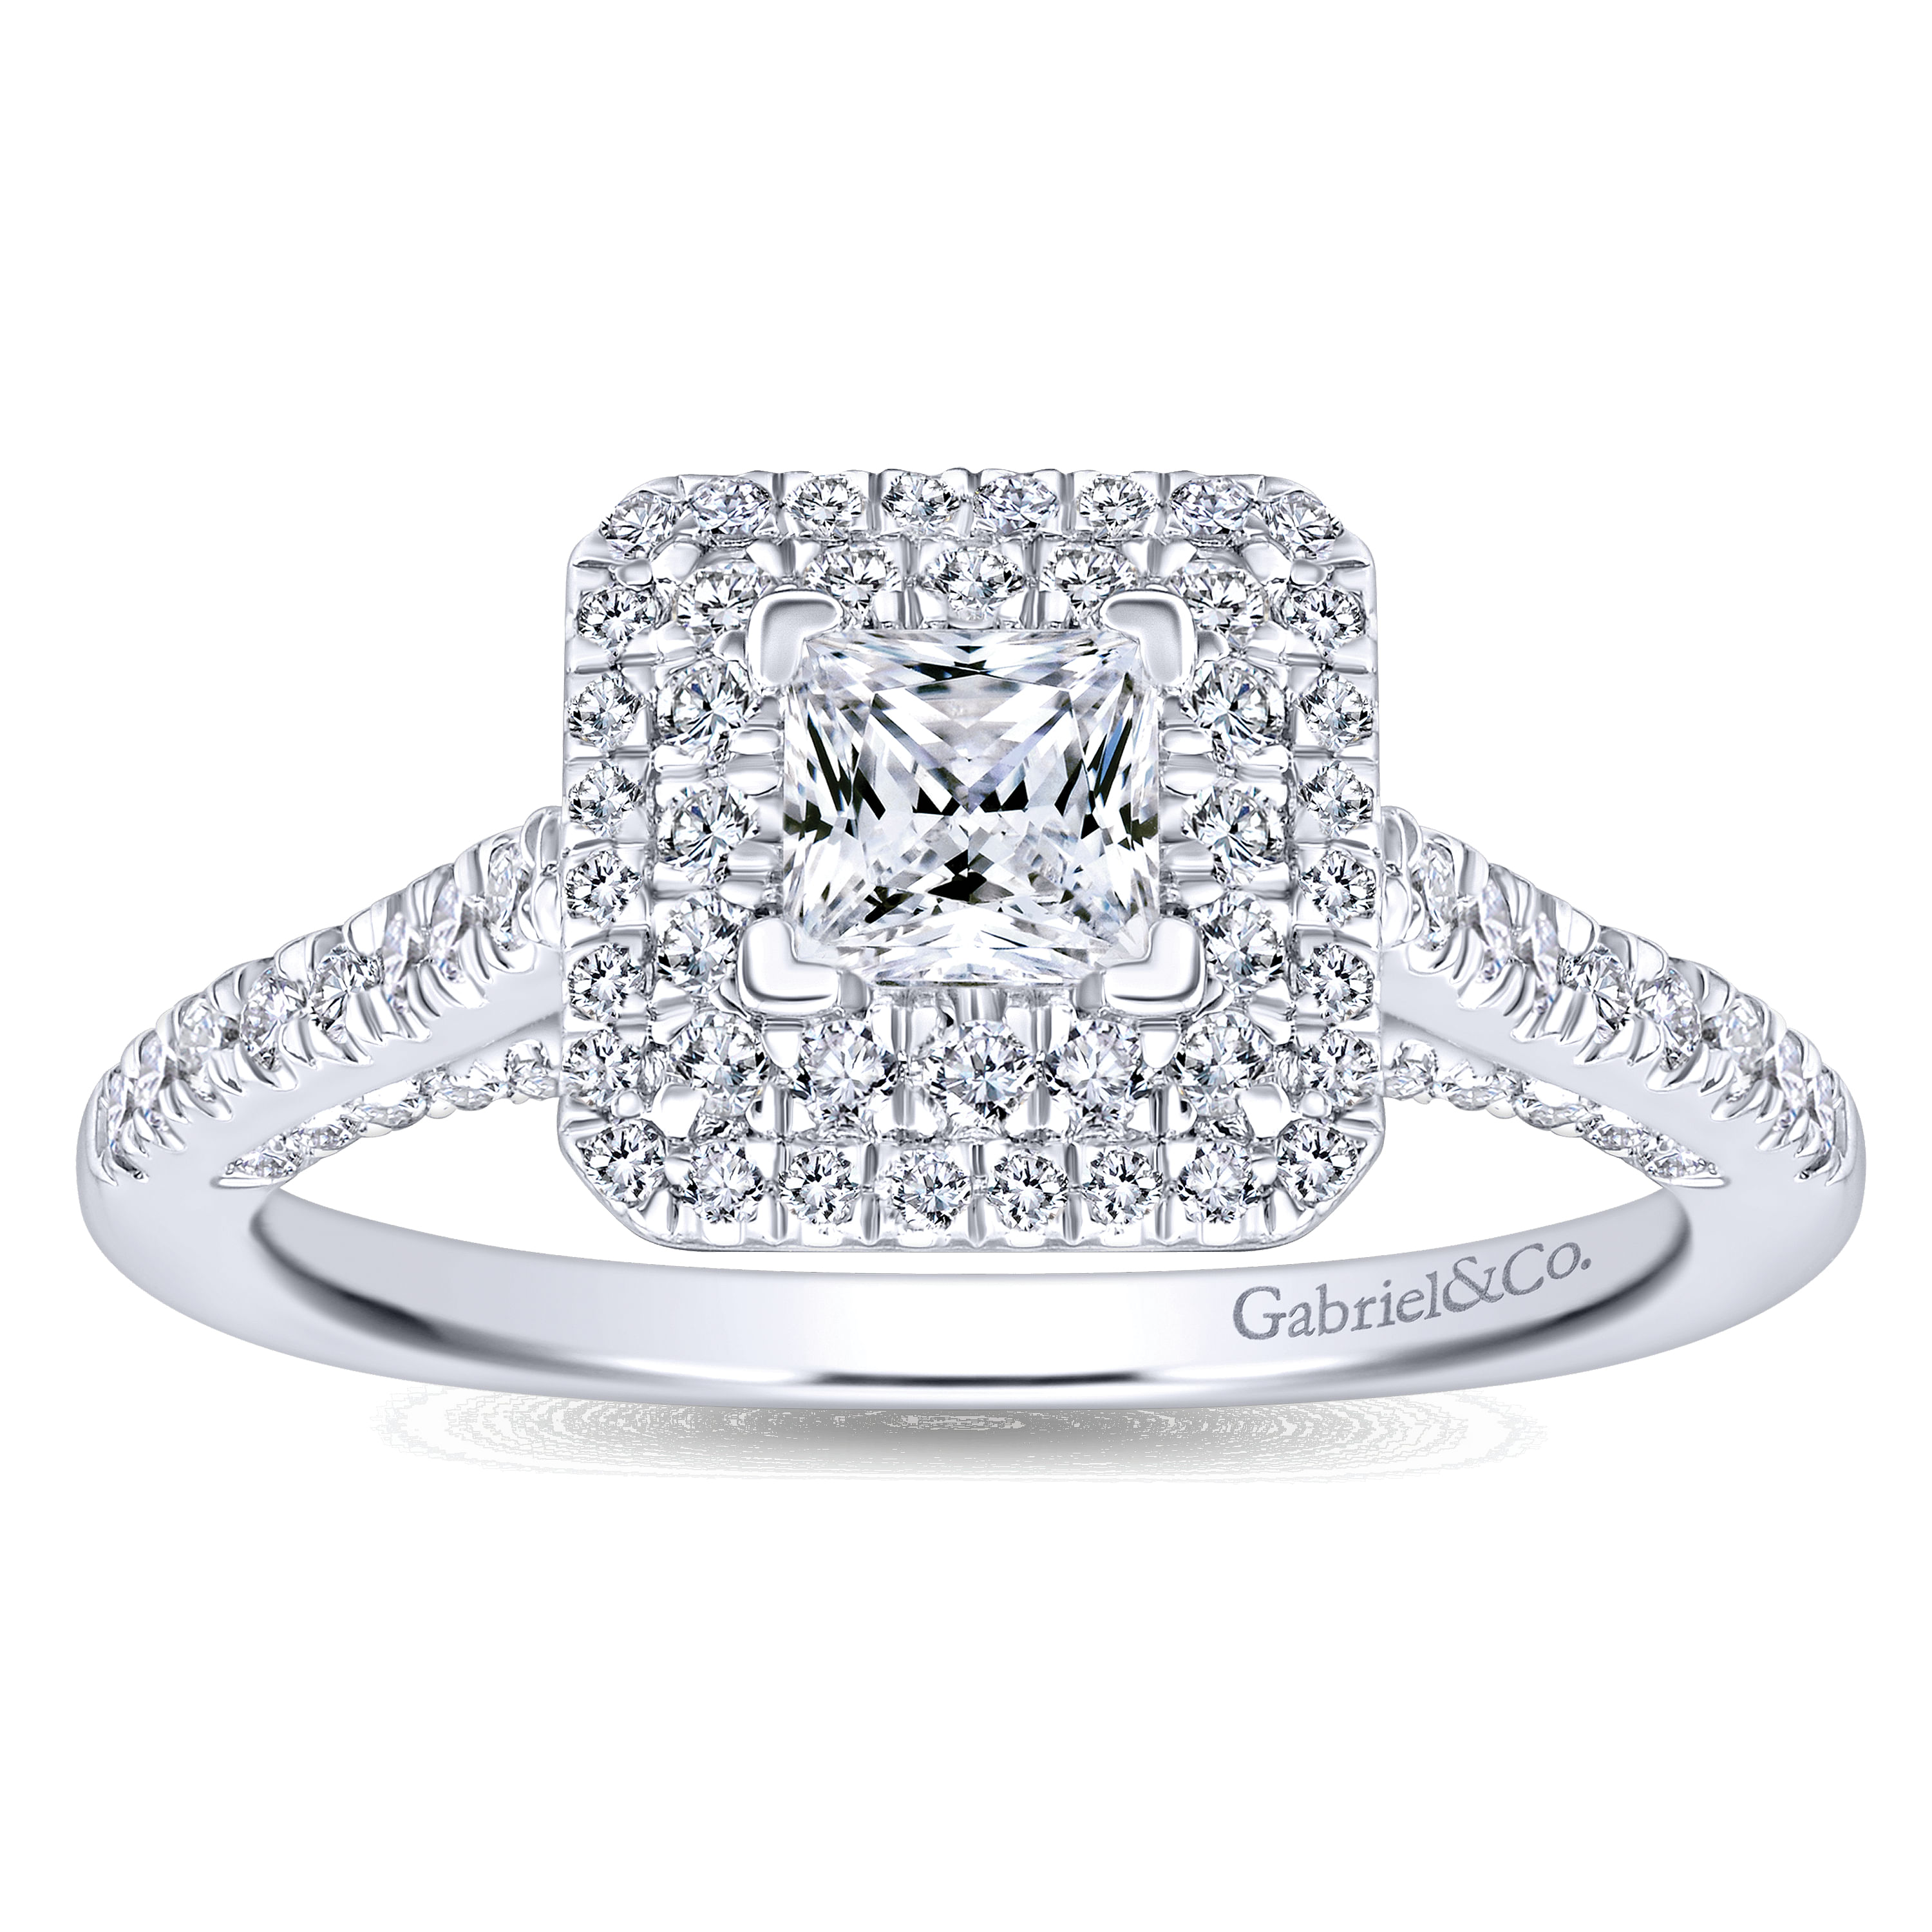 14K White Gold Princess Double Halo Complete Diamond Engagement Ring